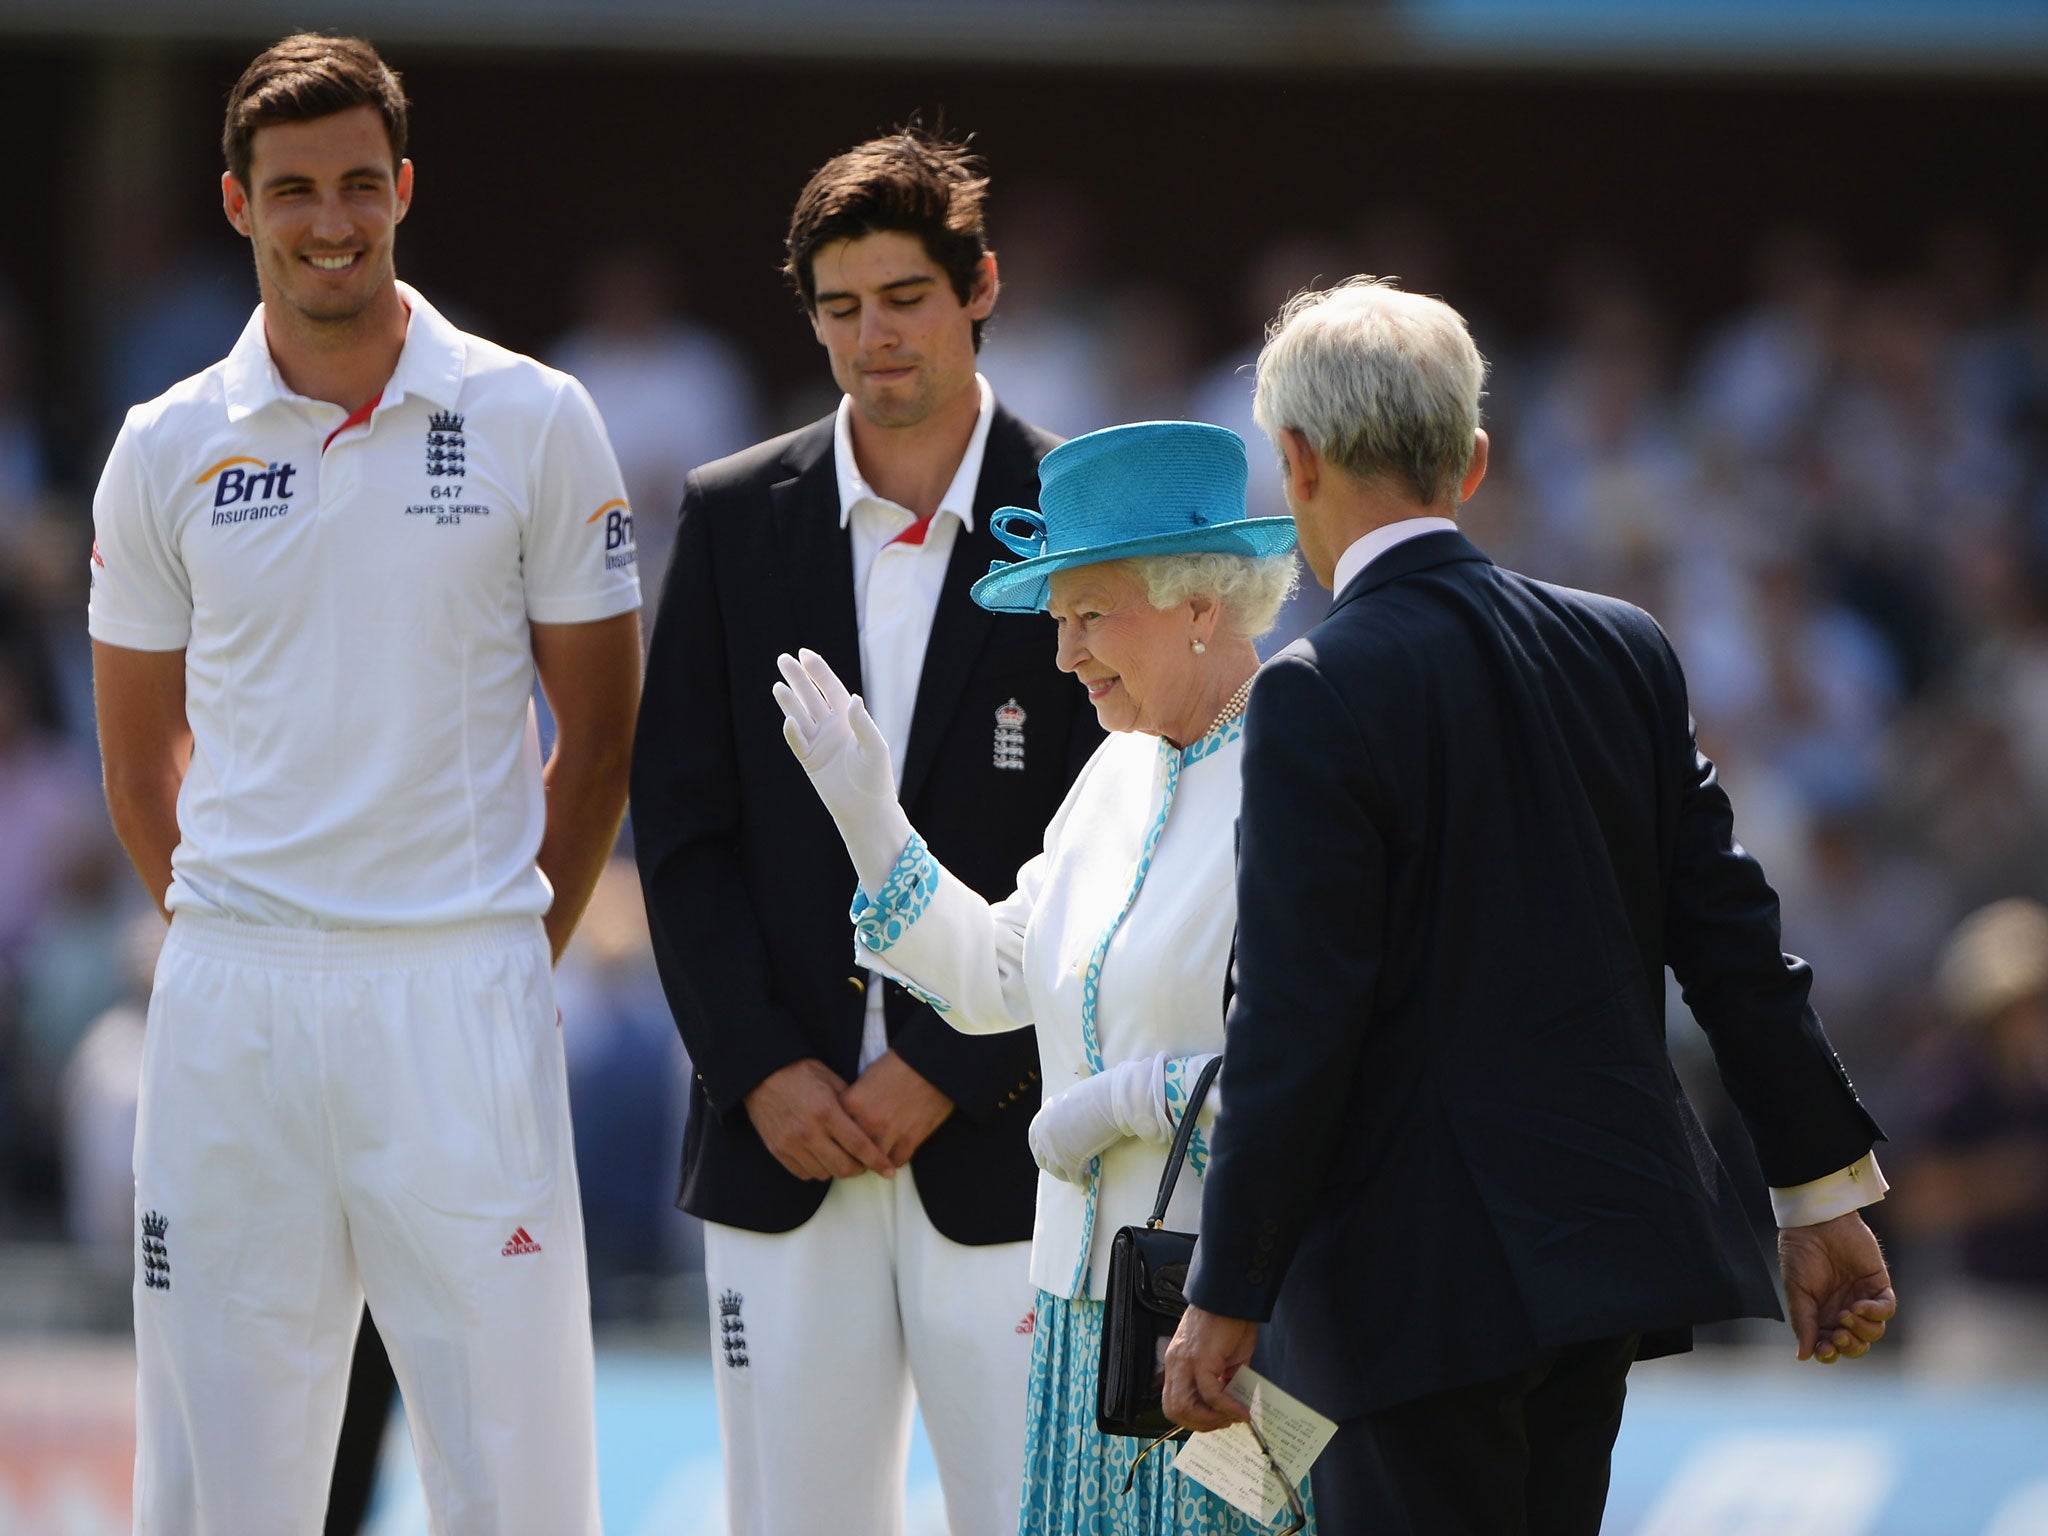 The Queen is introduced to the players before the start of play